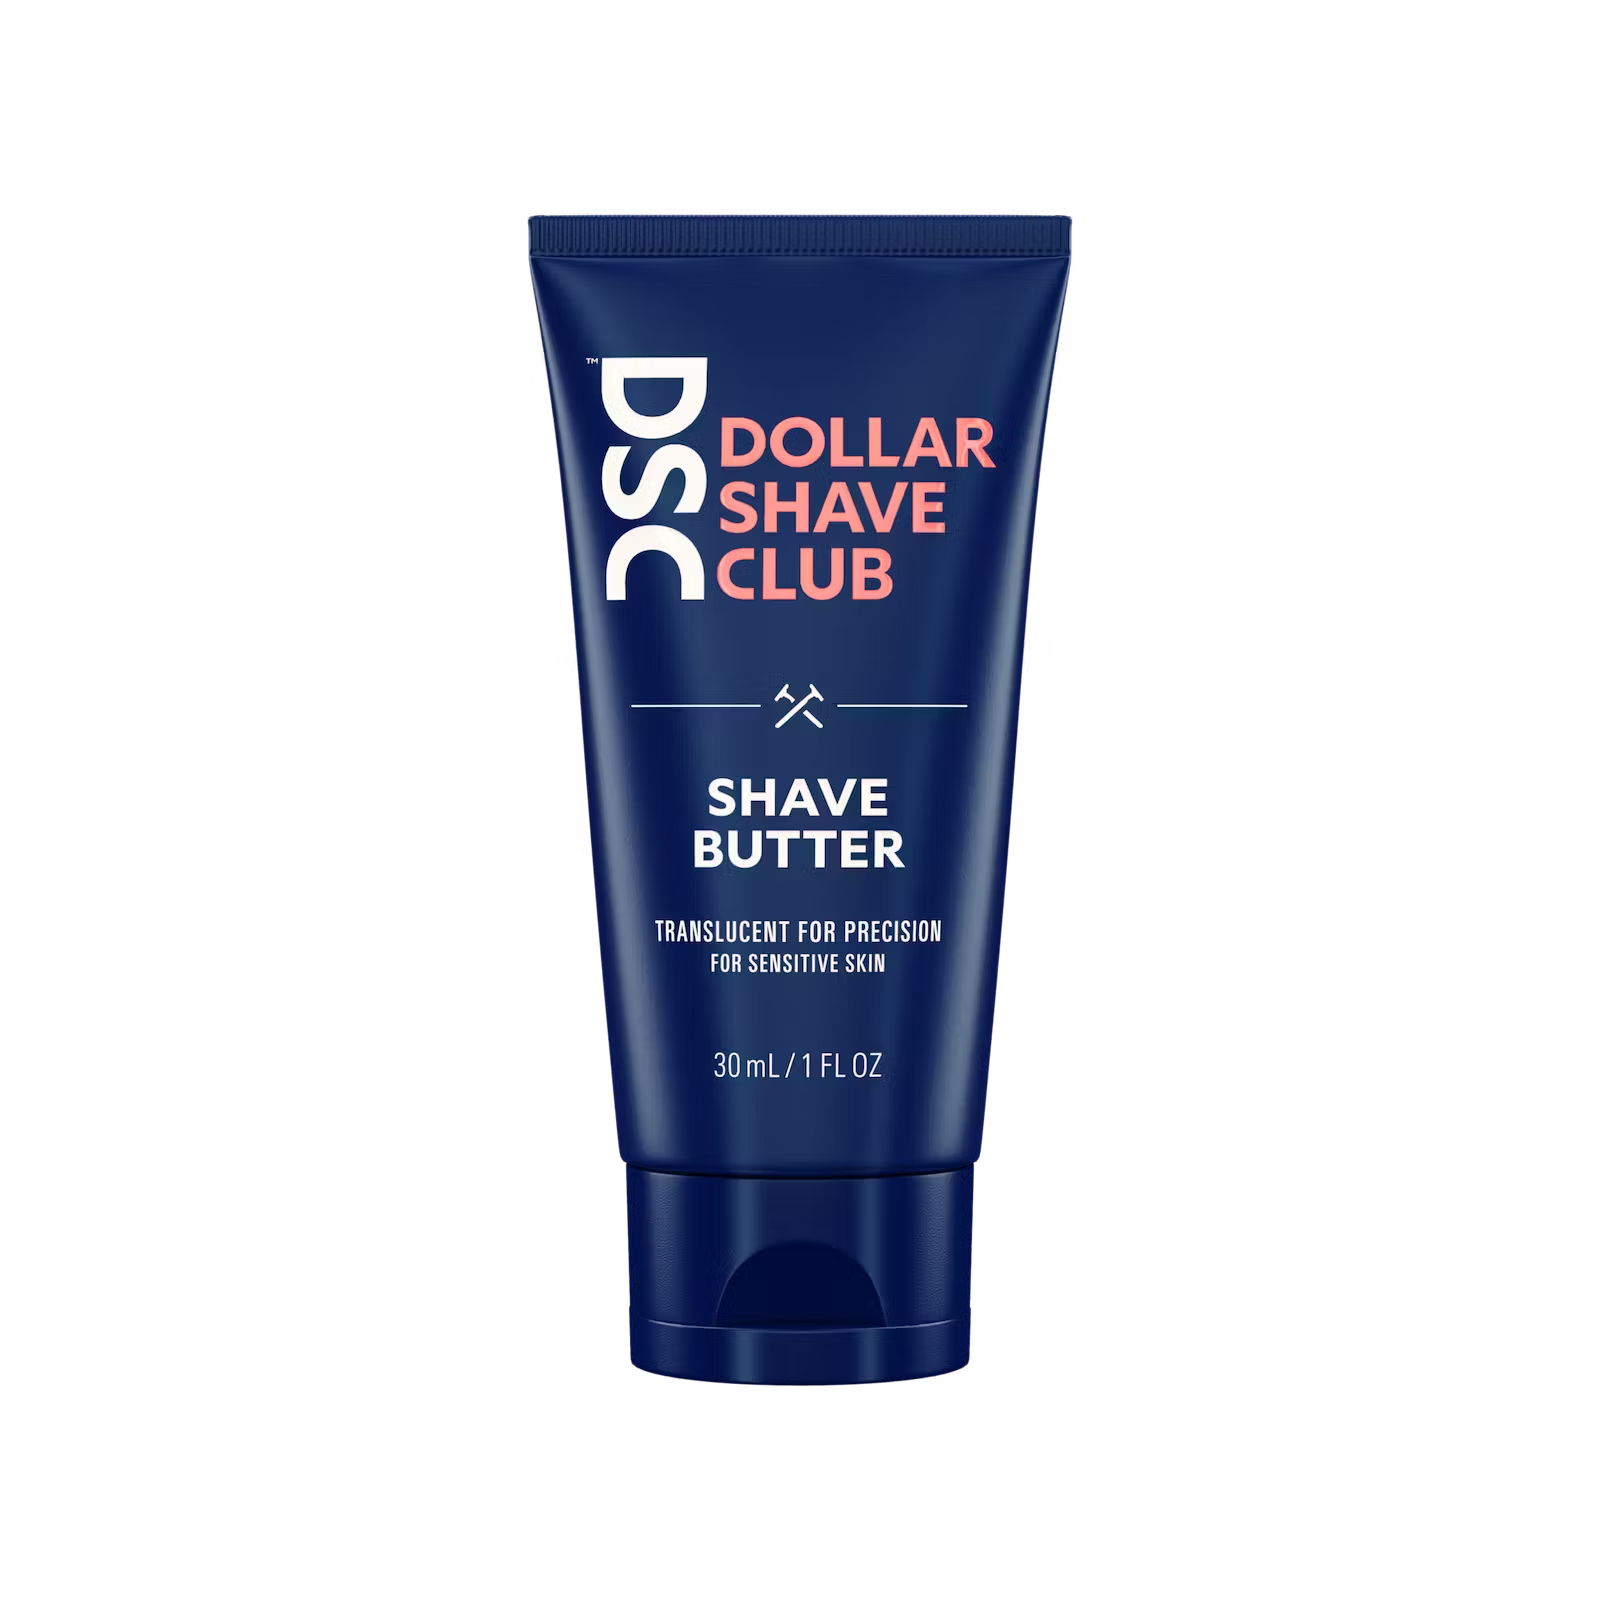 Dollar Shave Club Shave Butter trial size product image against blank backdrop.